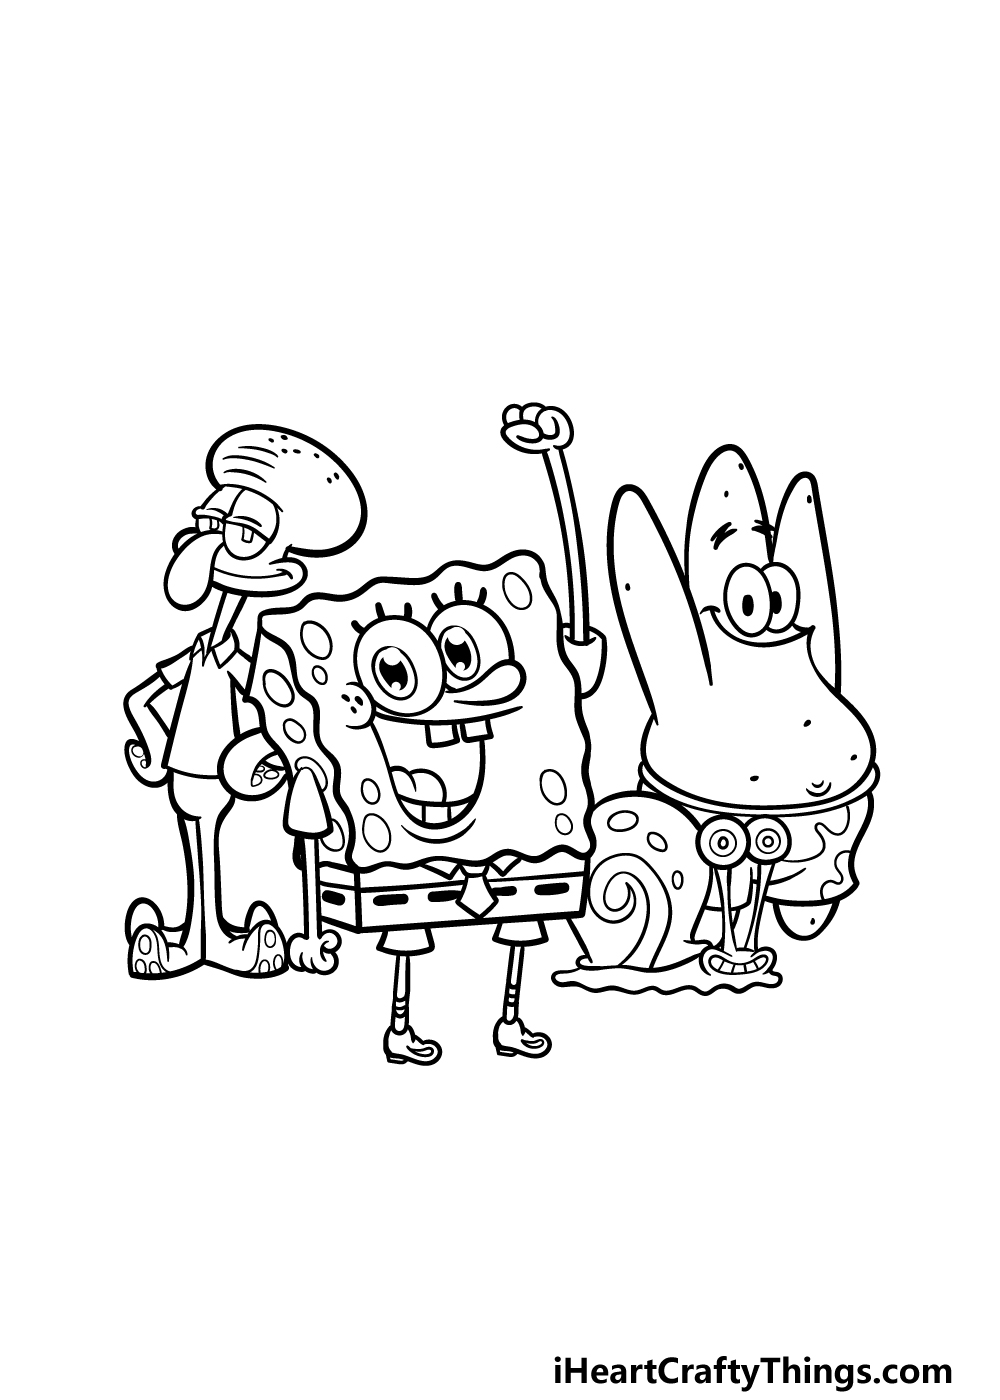 how to draw Spongebob characters step 6